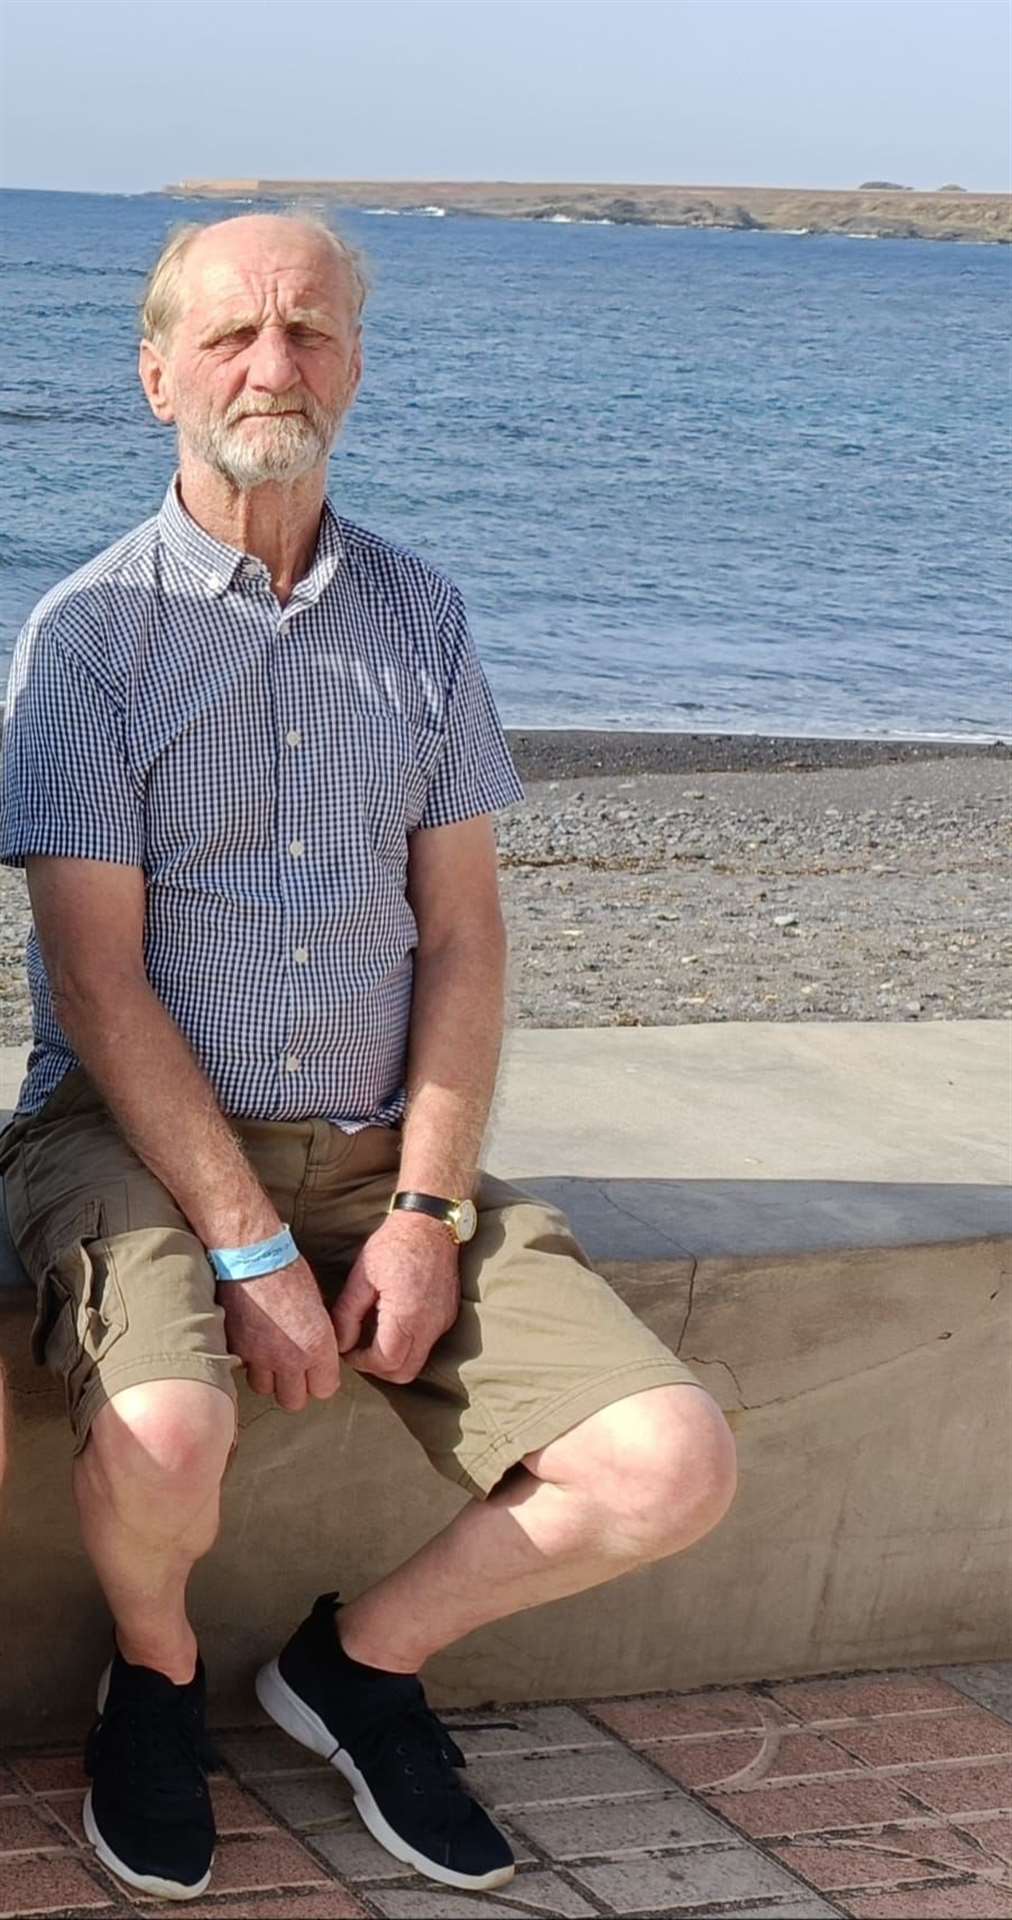 Leslie Forbes, 70, was ‘a loving husband, father and grandfather, who will be sadly missed by his family and friends’, his family said (Family handout/PA)